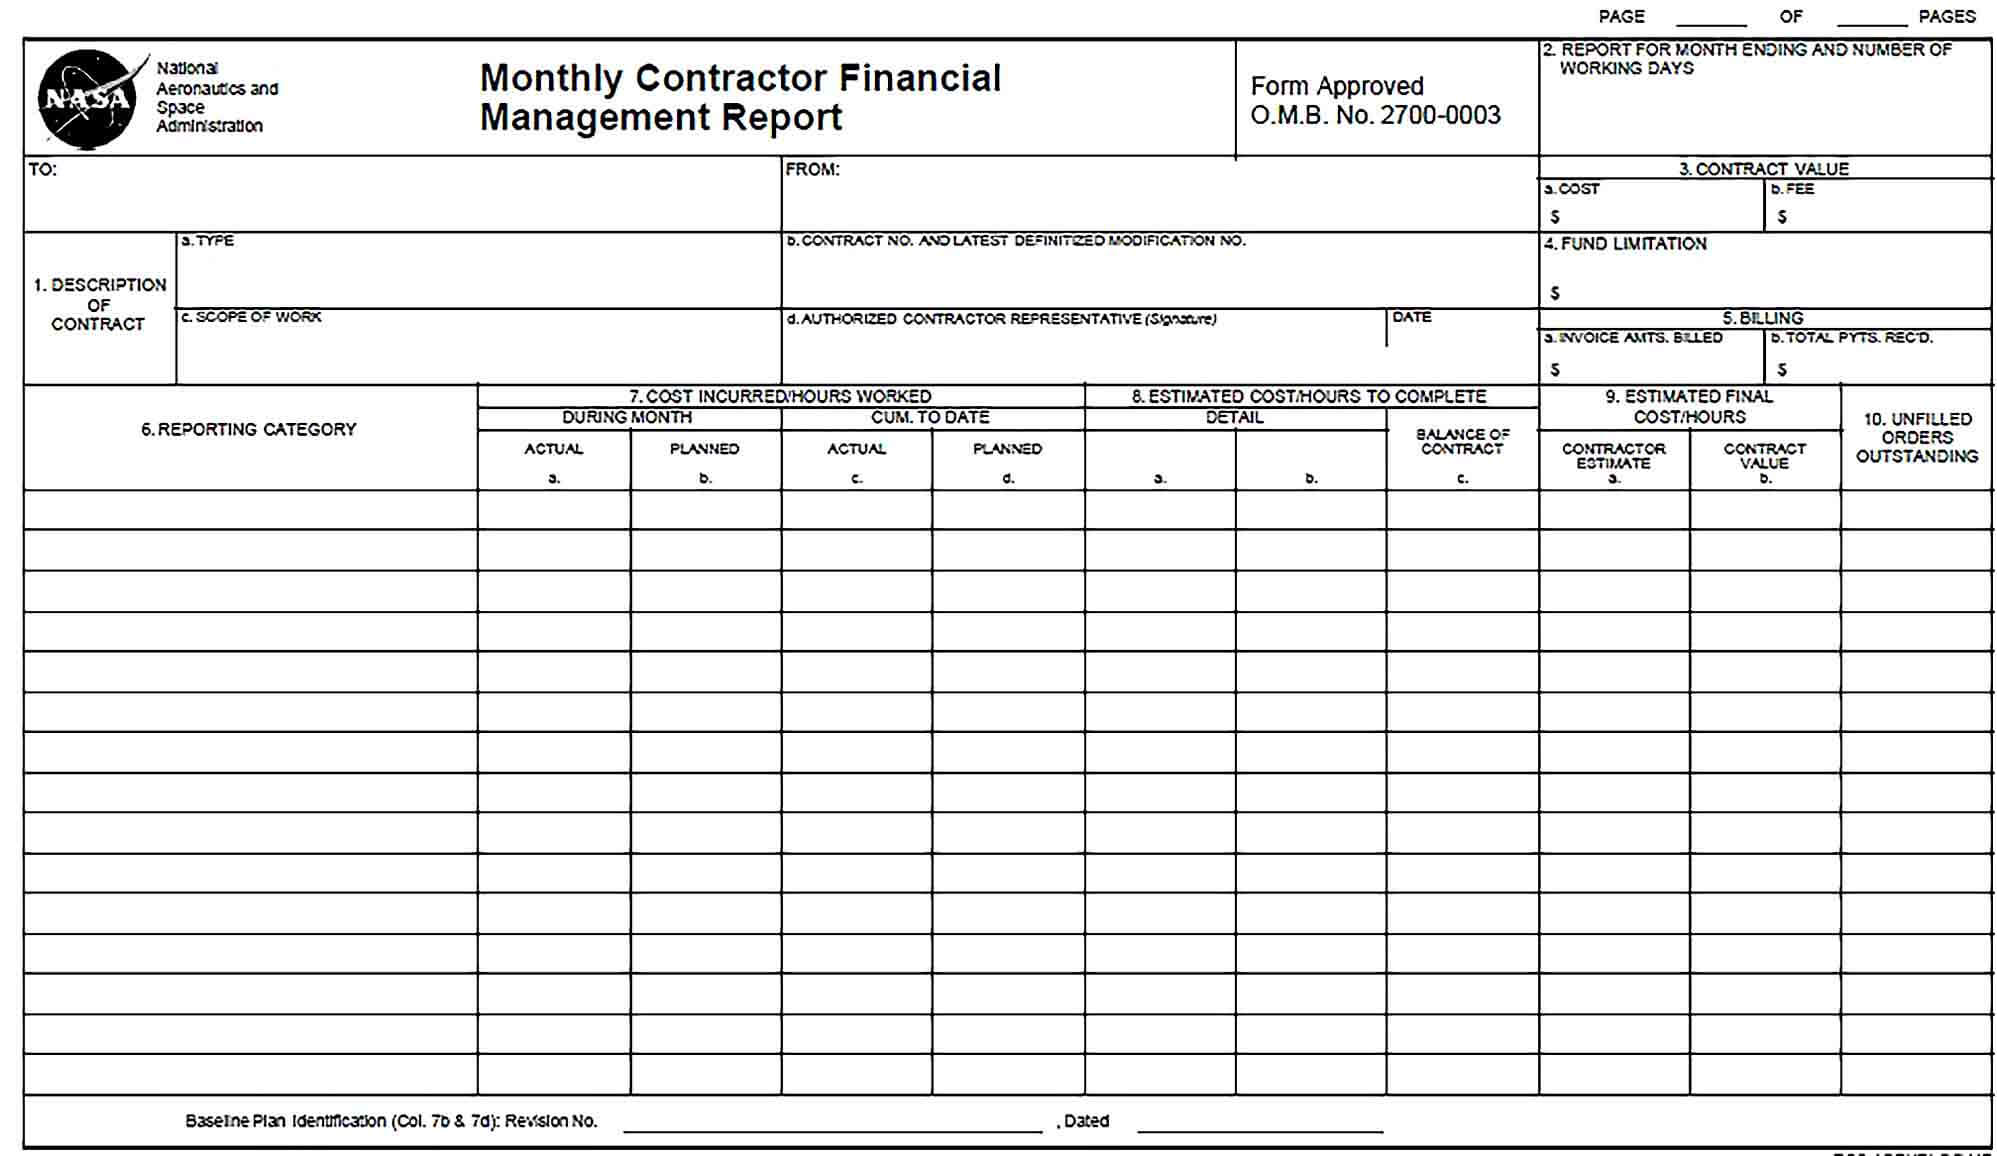 Sample Monthly Contractor Financial Management Report